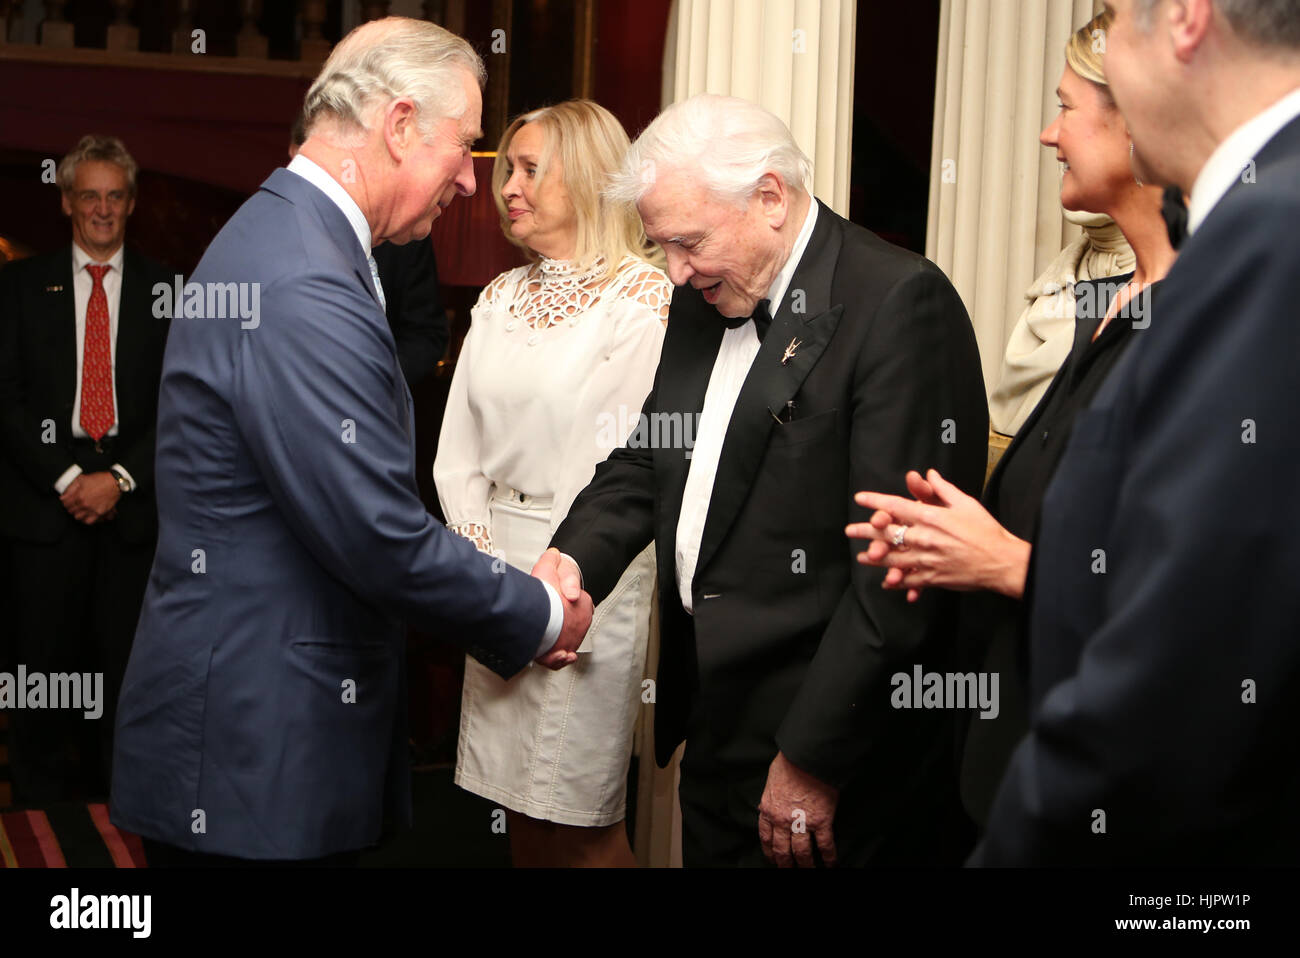 The Prince of Wales (left) meets meets Sir David Attenborough during a ...